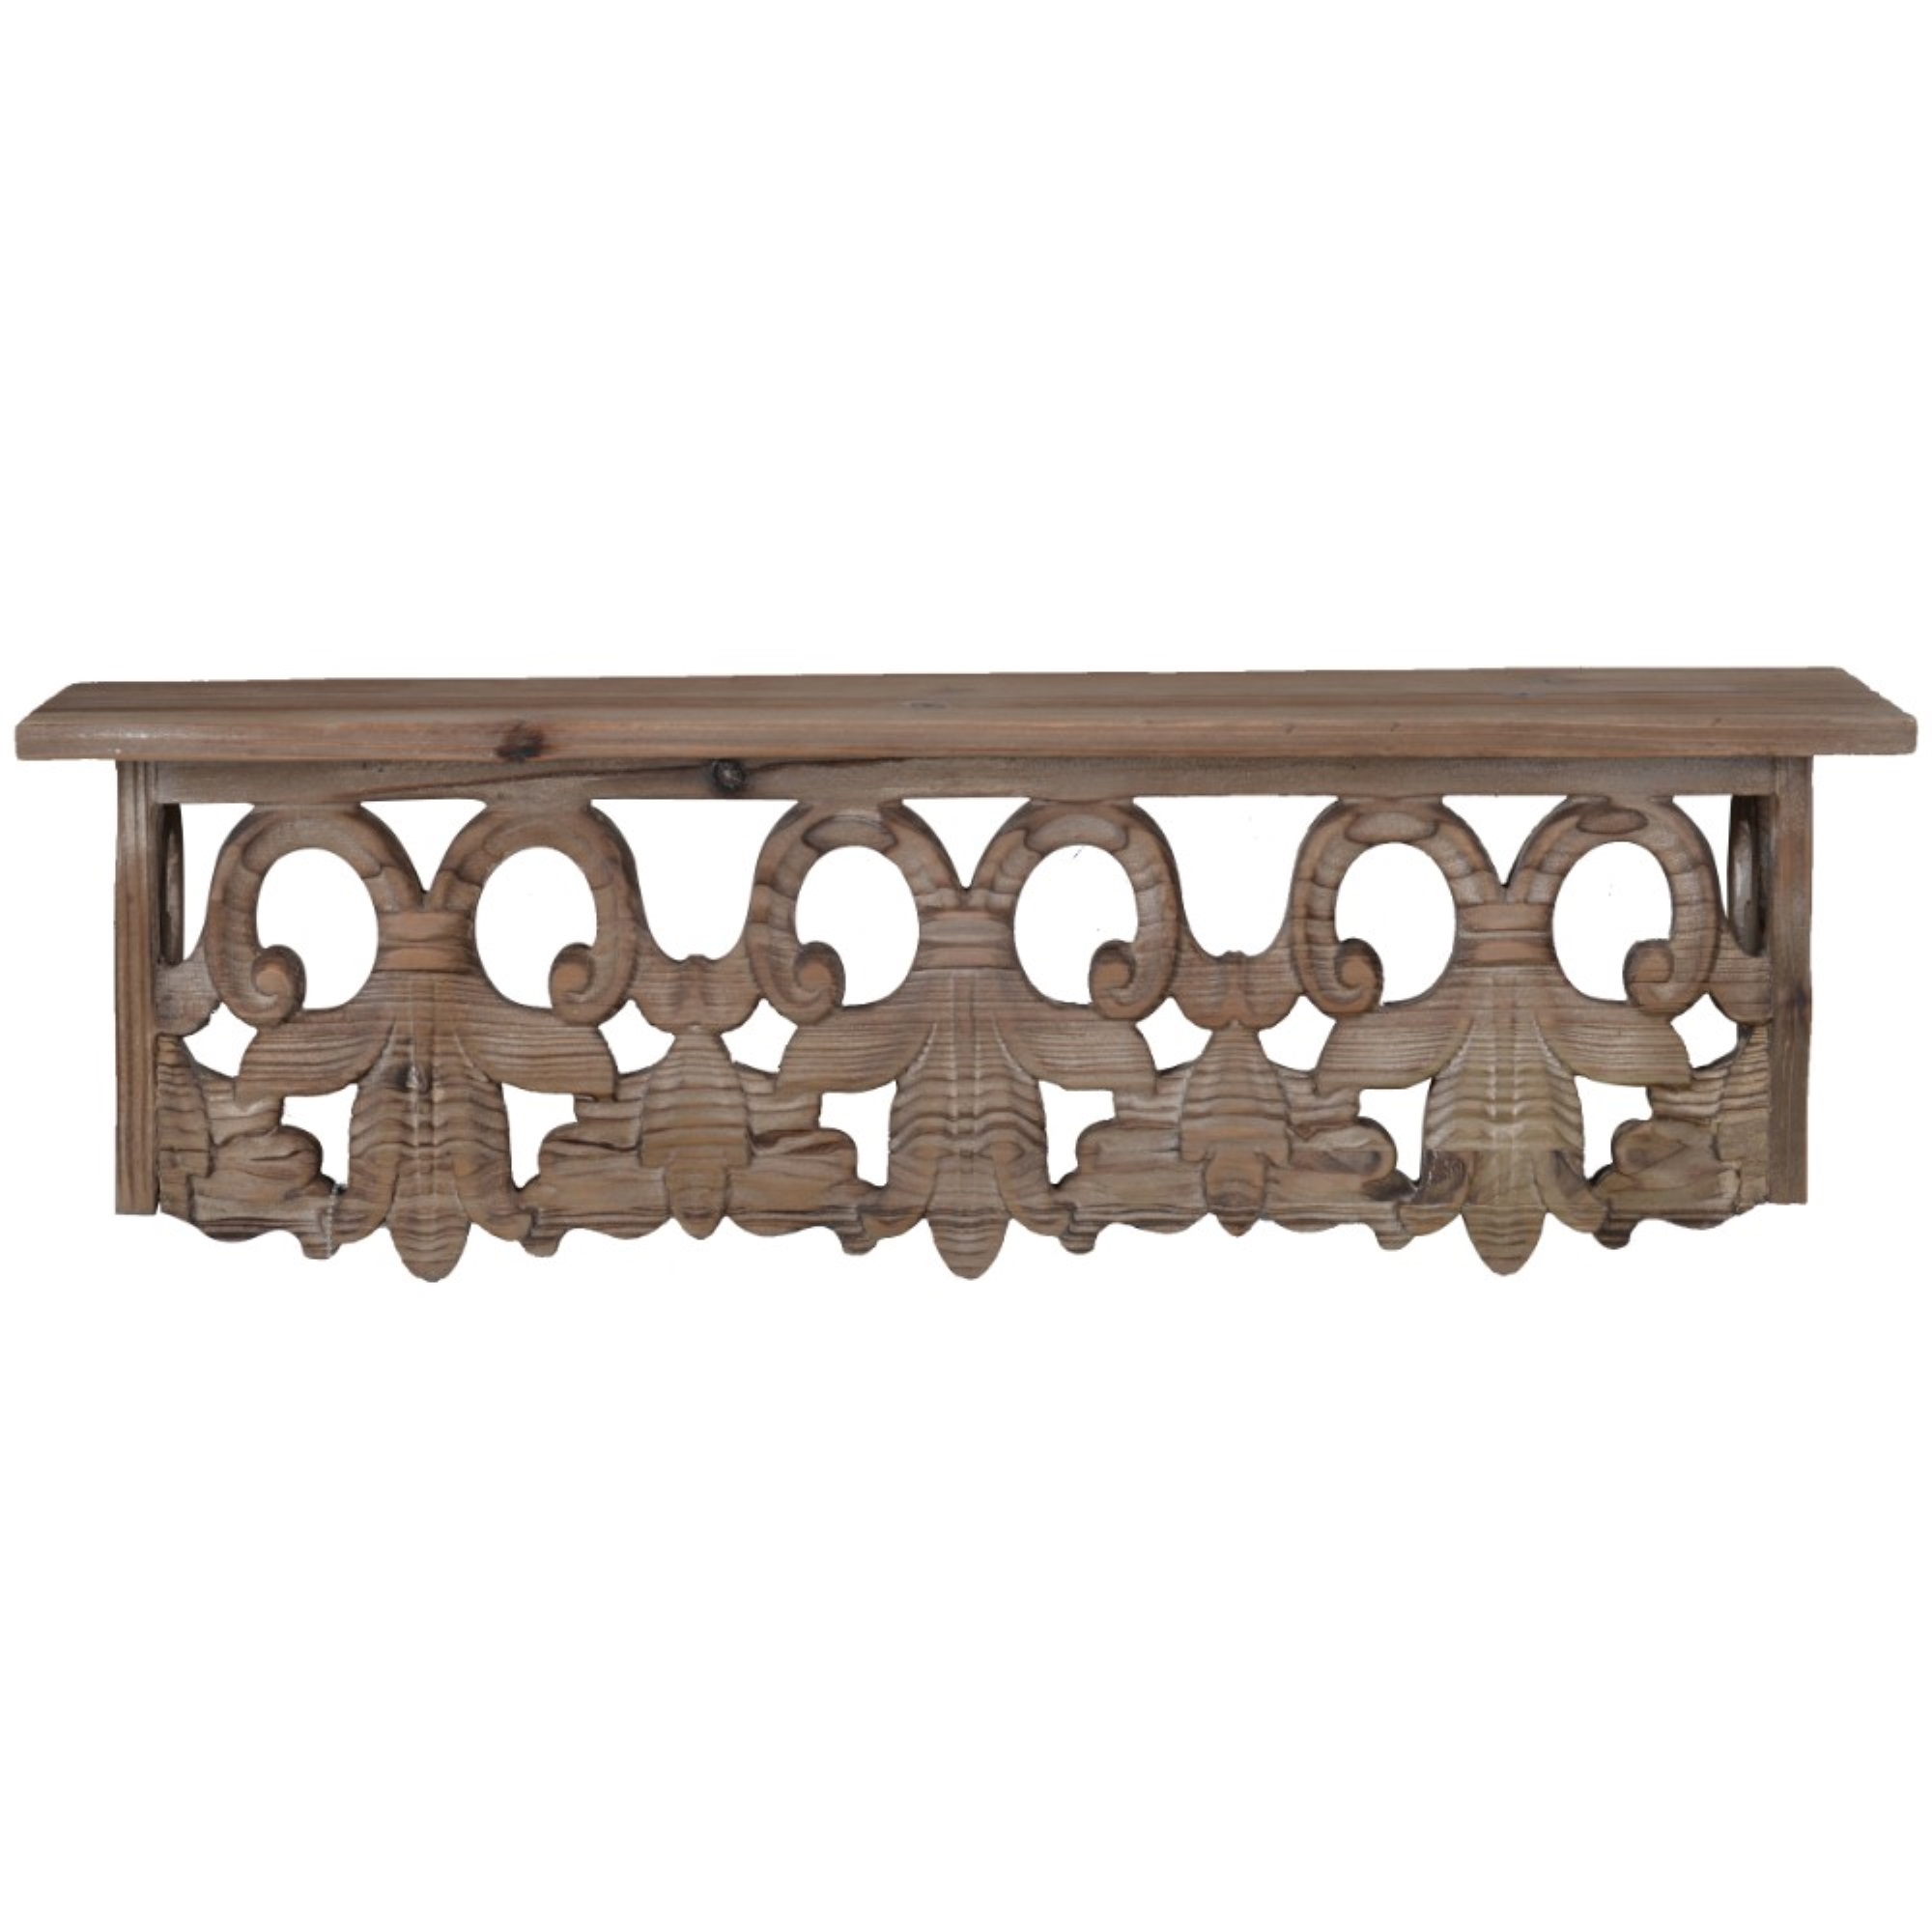 Benzara 23.5 Inches Wooden Wall Shelf with Scrollwork, Small, Brown